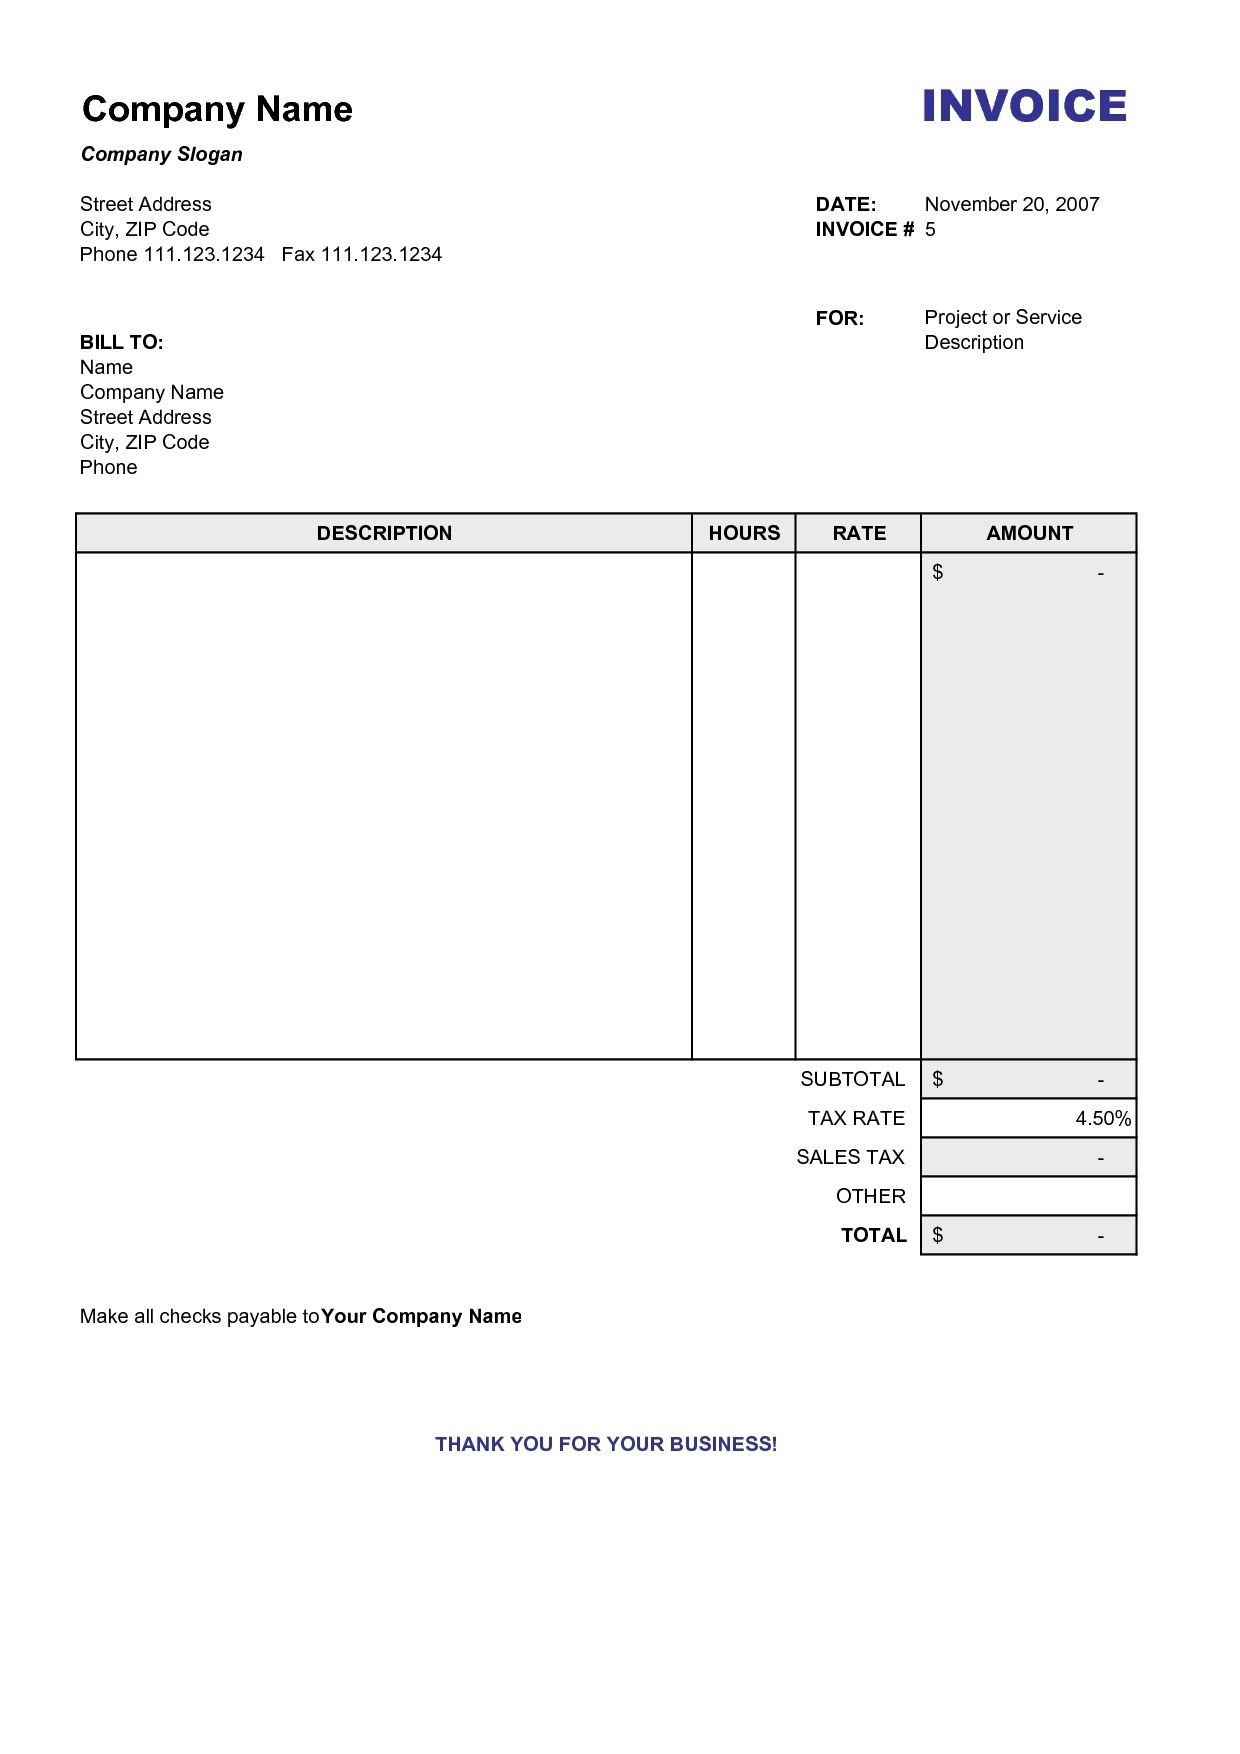 Copy Of A Blank Invoice Invoice Template Free 2016 Copy Of Blank - Invoice Templates Printable Free Word Doc